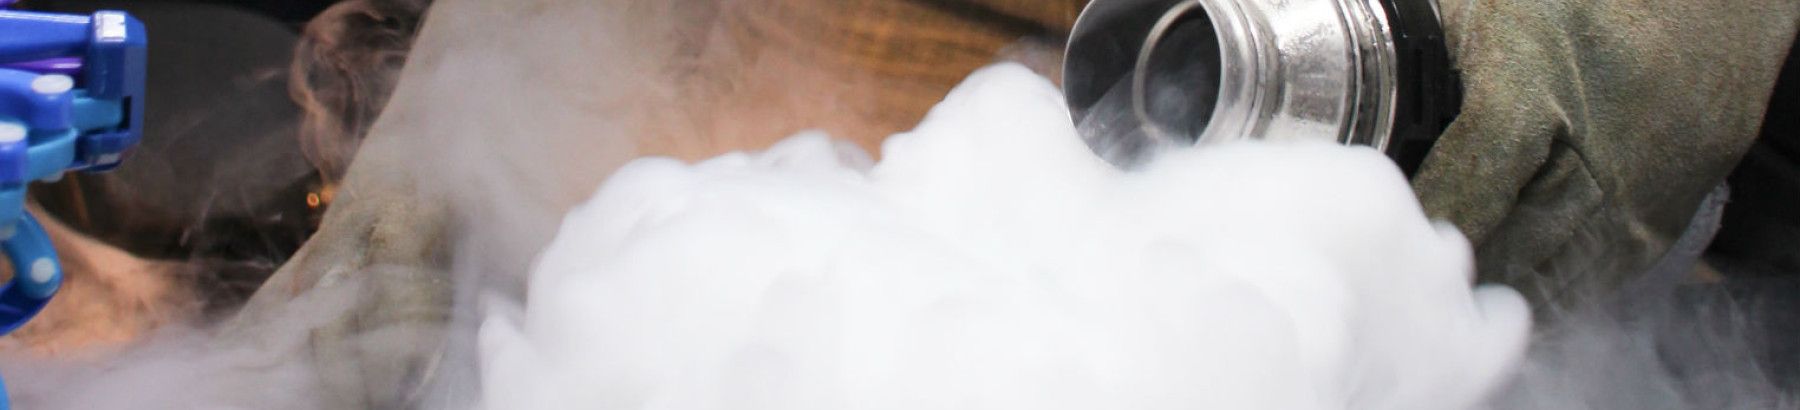 Image: dry ice coming out of a container